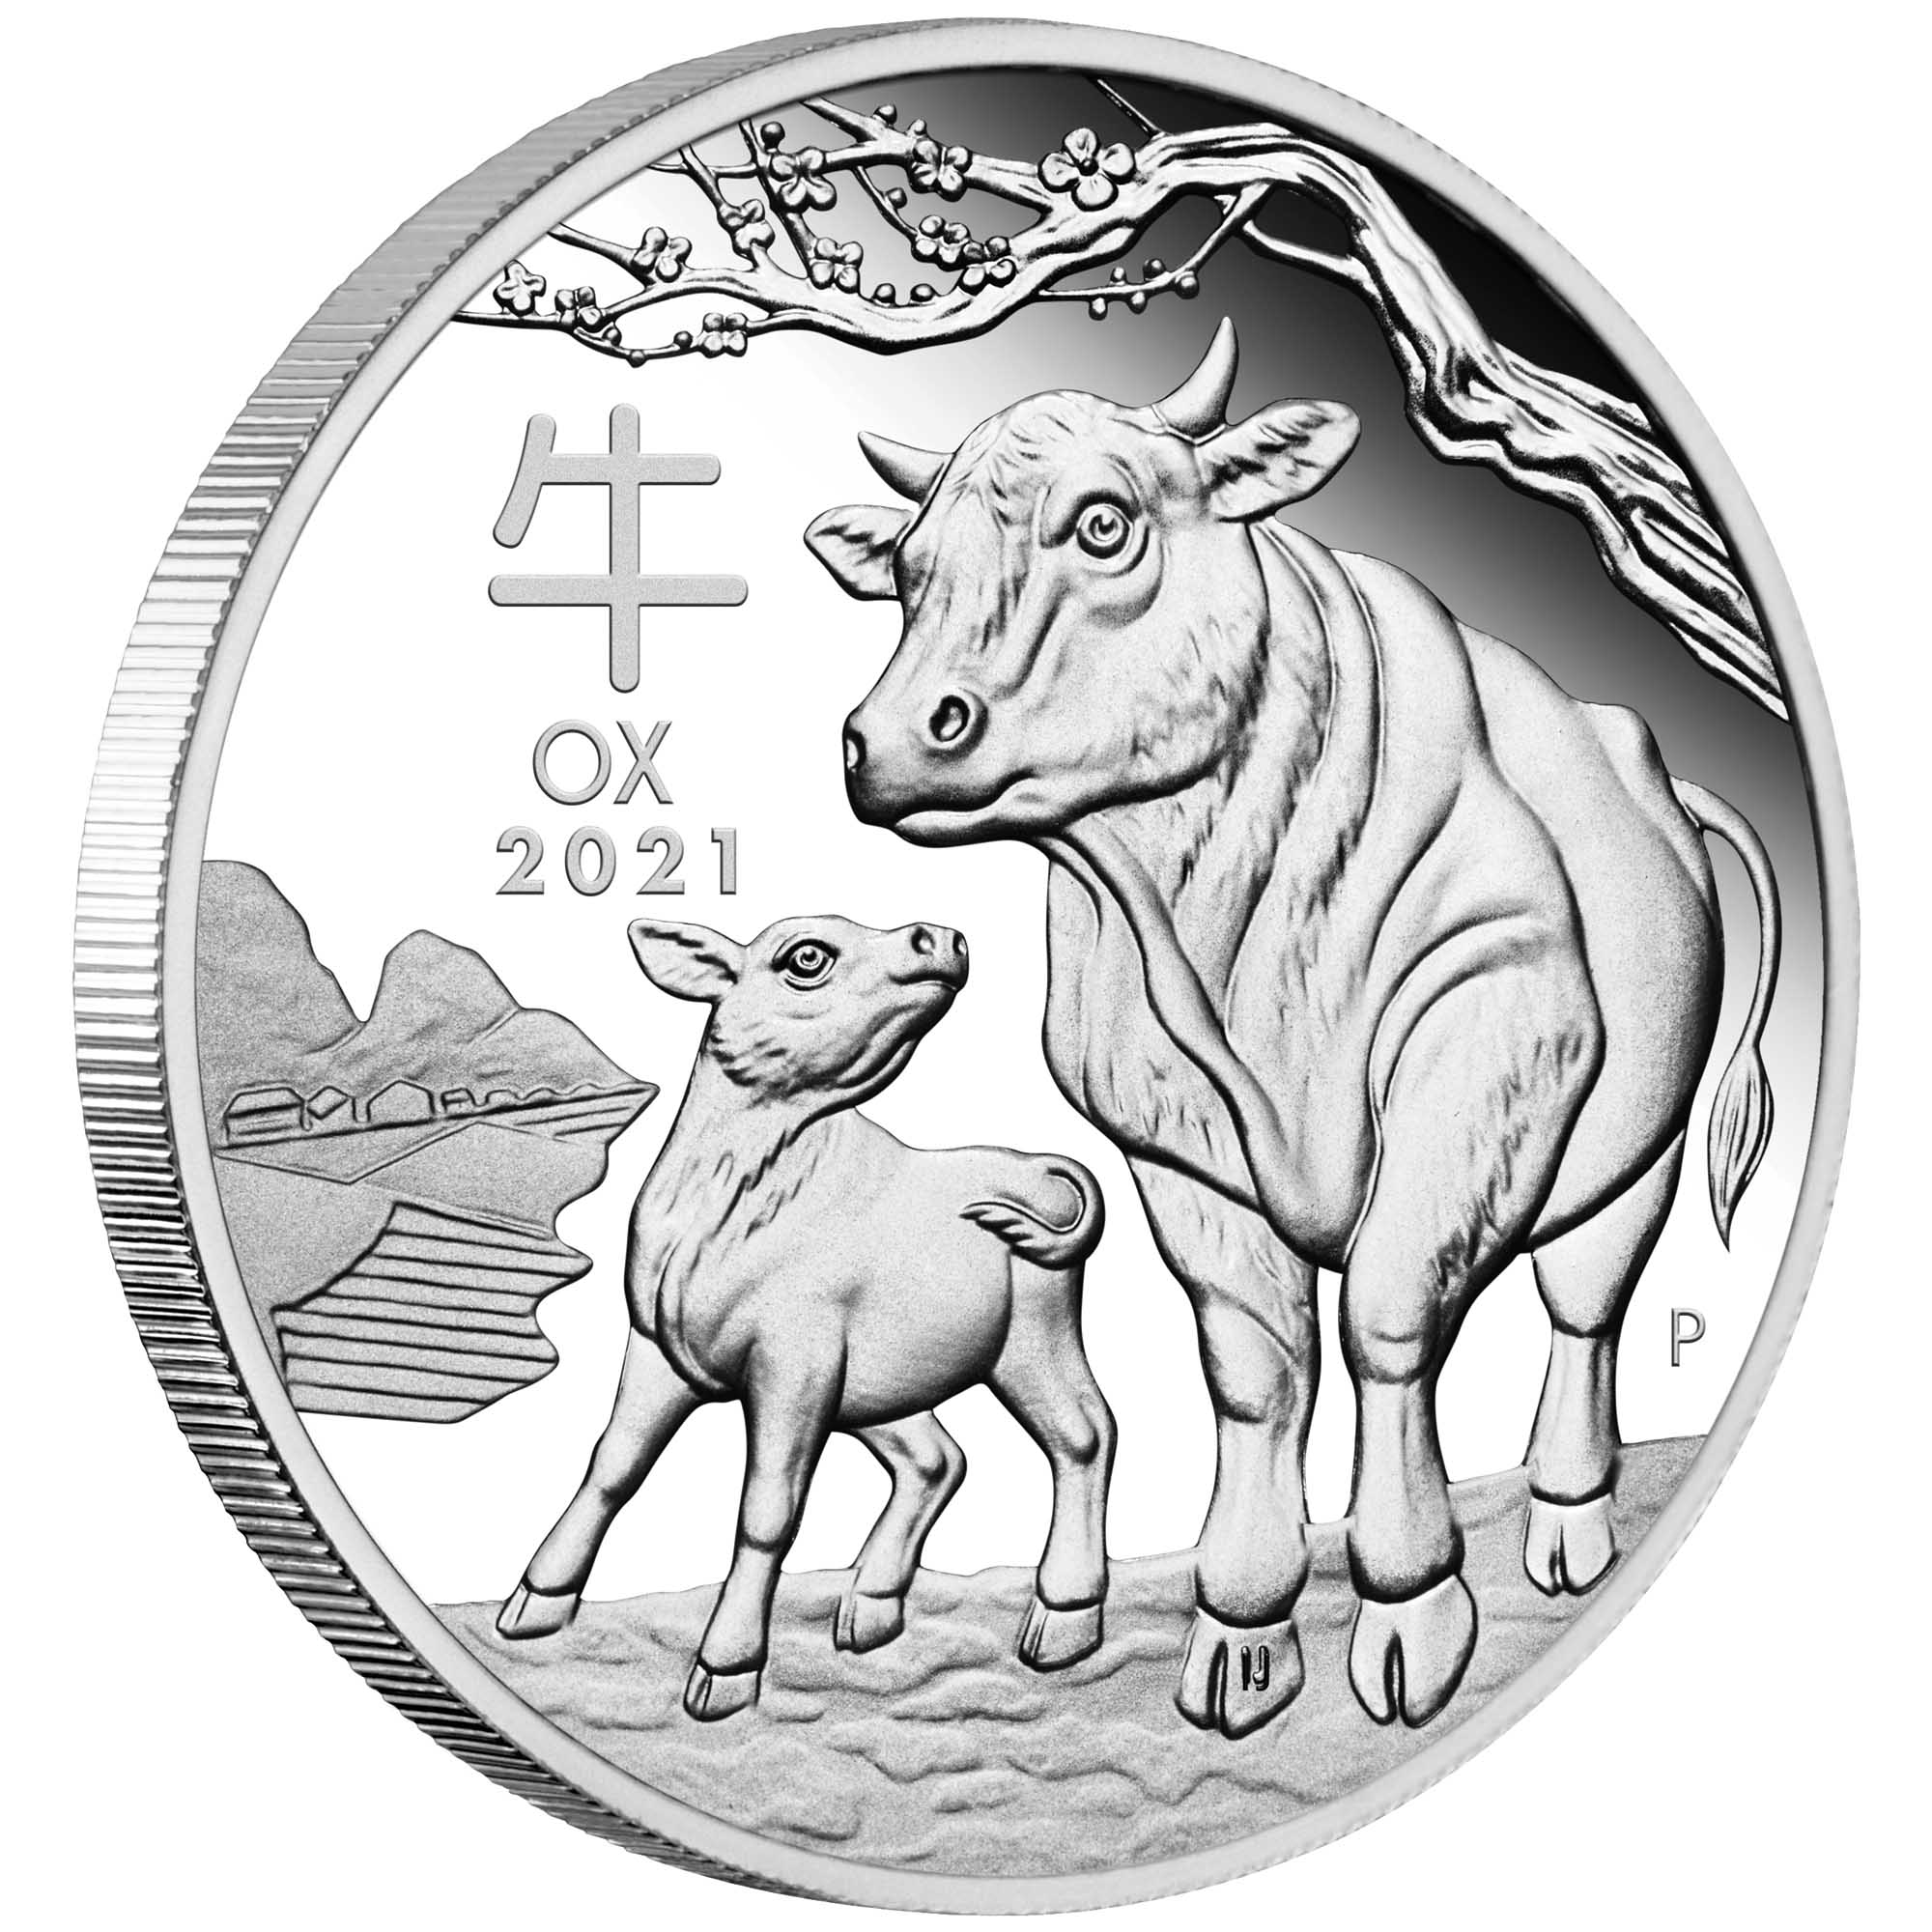 Details about   2021 P Australia Year of Ox 1 oz Silver High Relief Lunar SeriesIII Proof Coin 